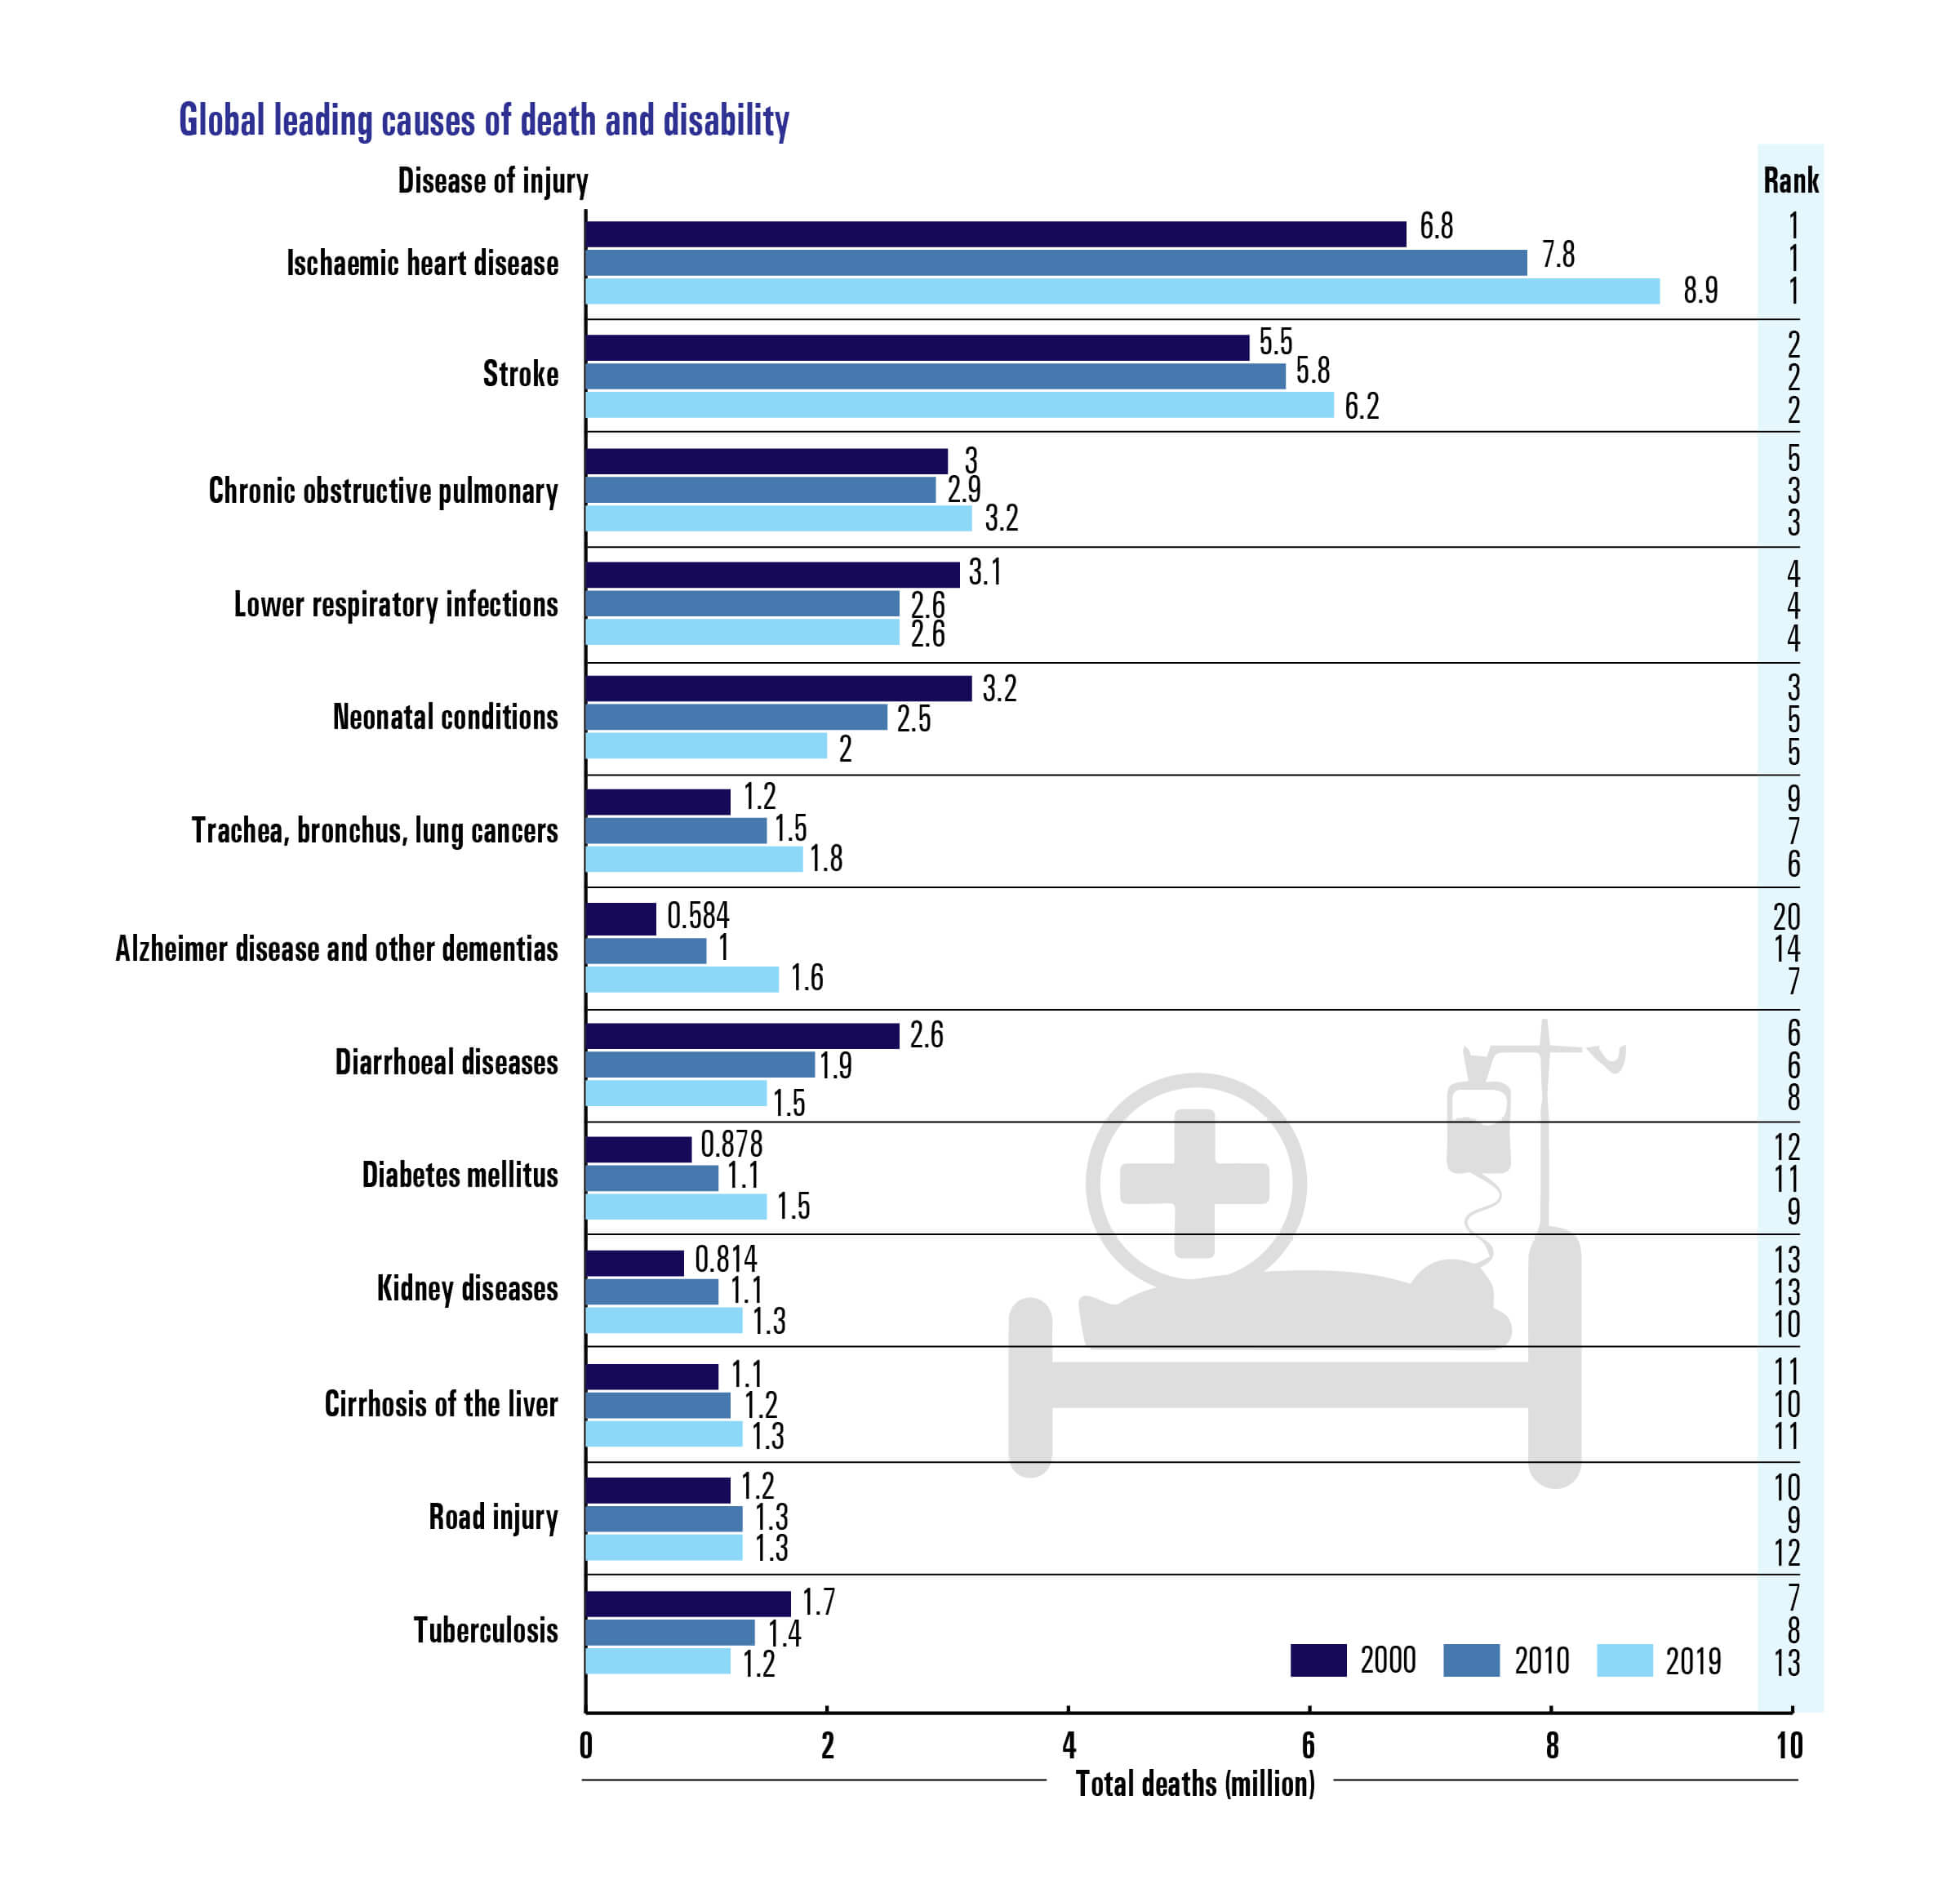 Global leading causes of death and disability